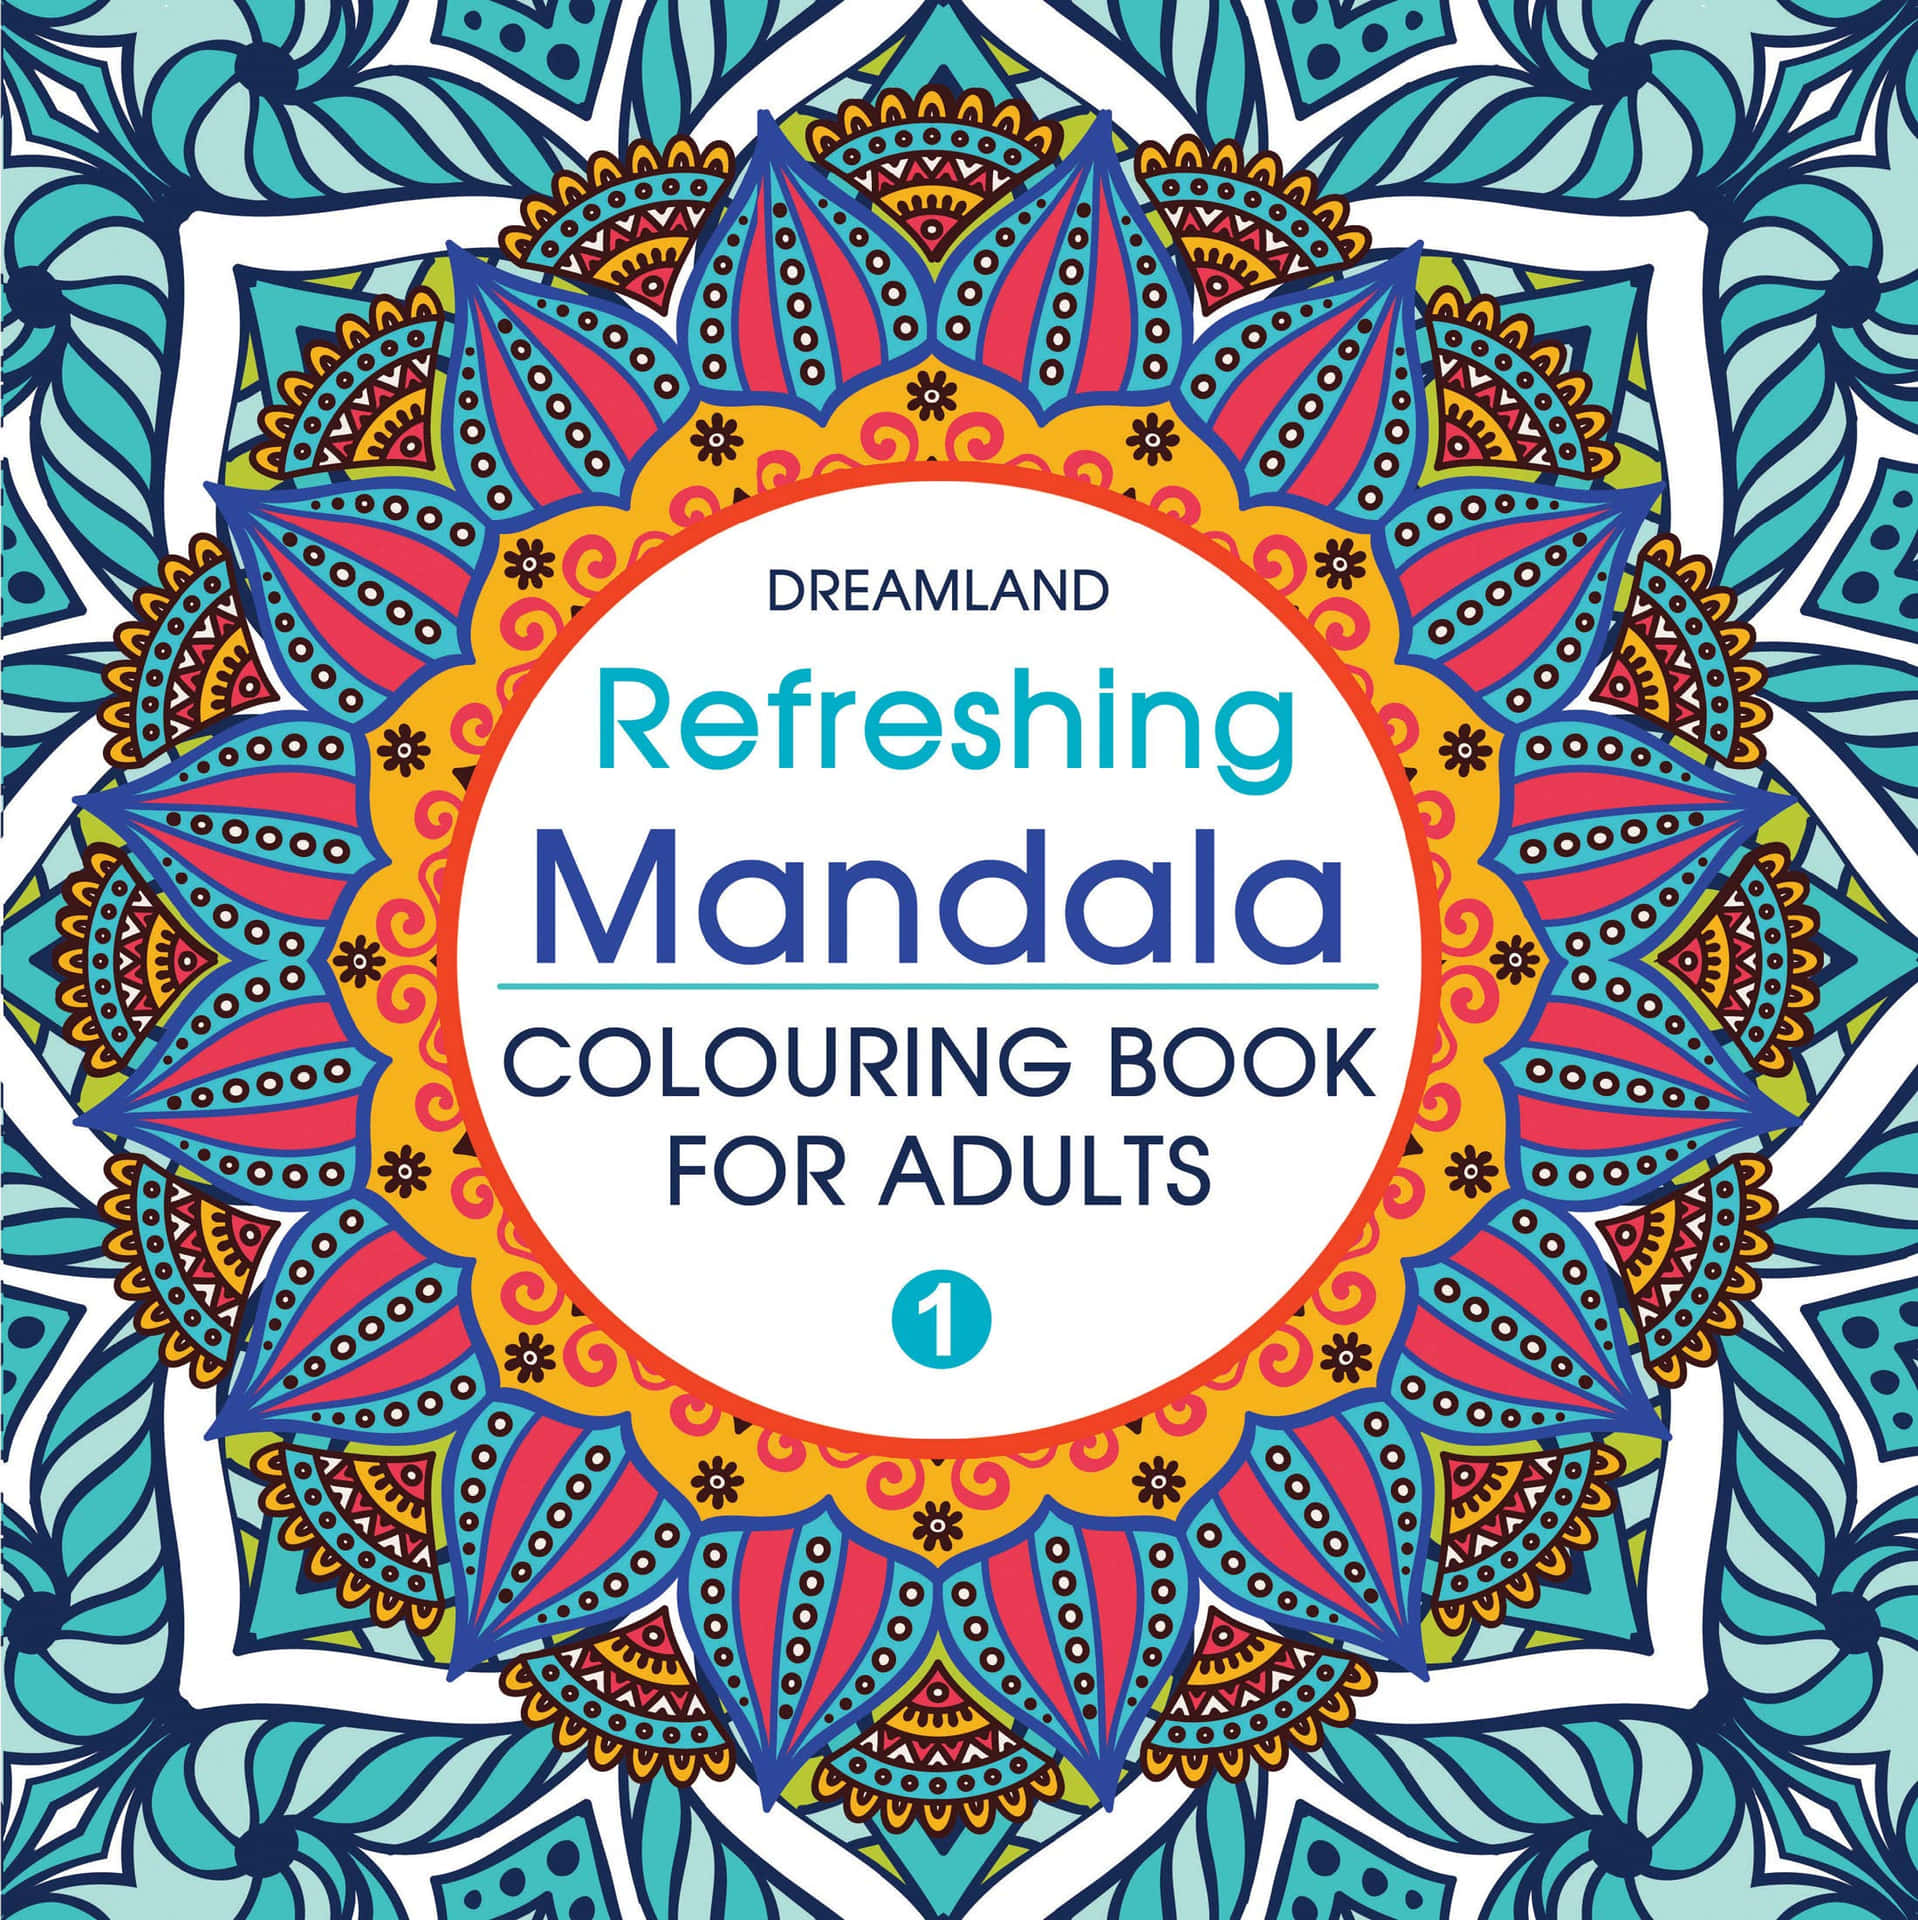 "Experience inner peace with a colorful Mandala"